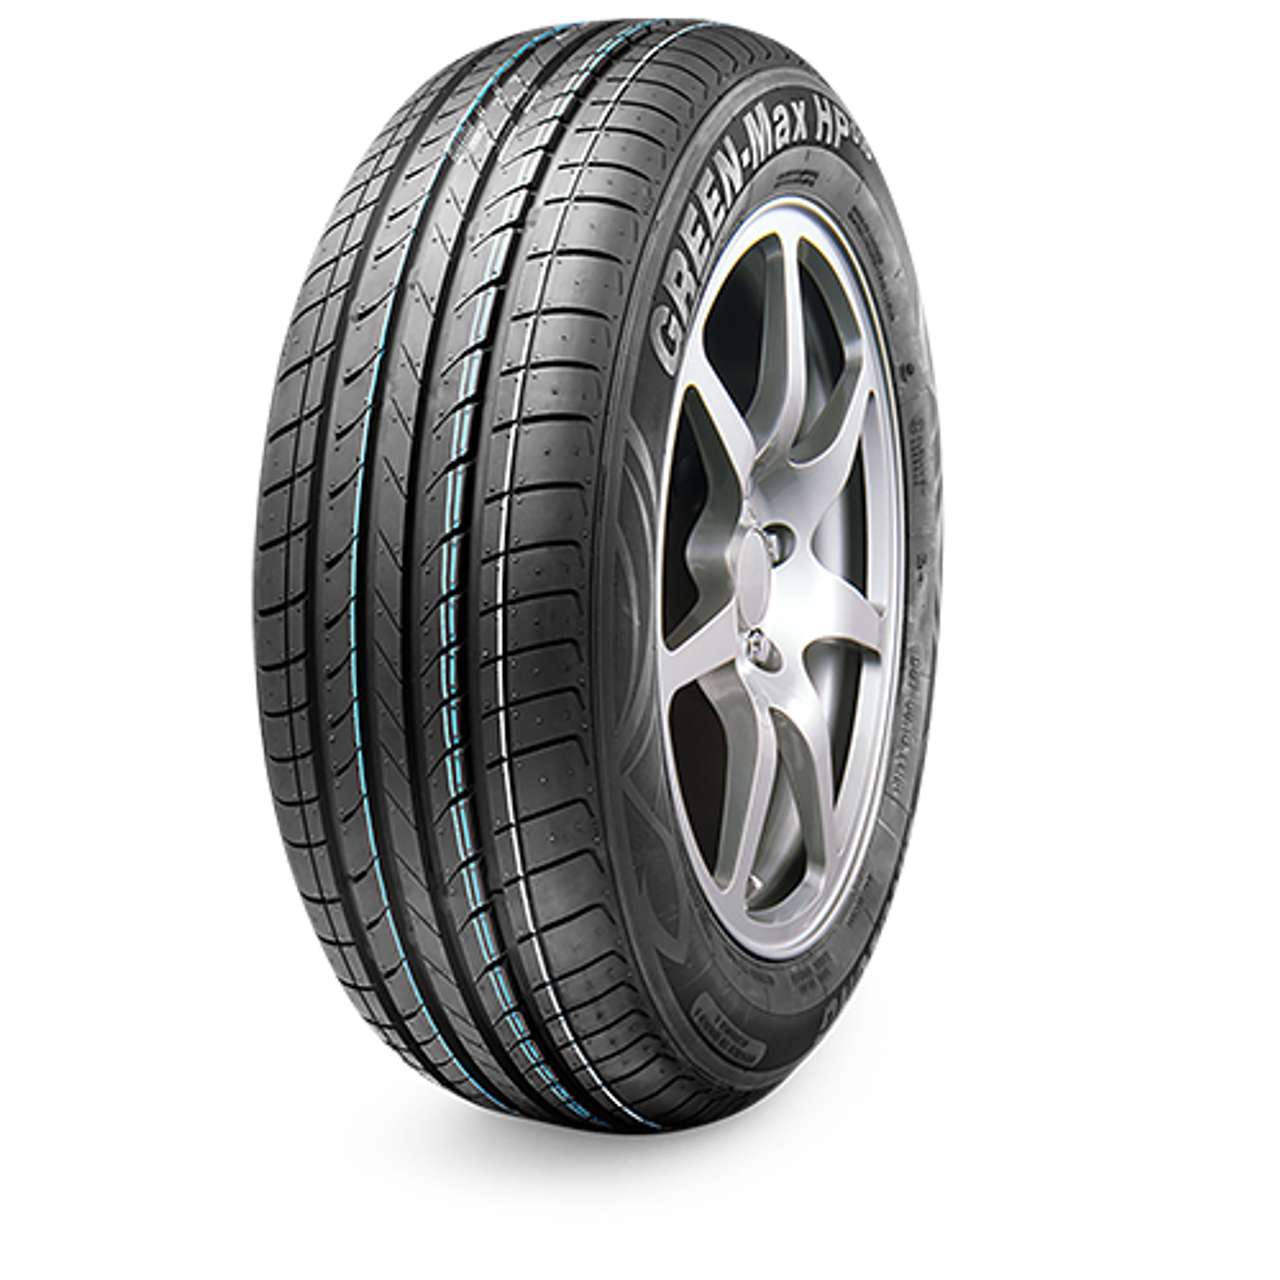 LINGLONG GREEN-MAX HP010 185/55R14 80H MFS BSW von LINGLONG